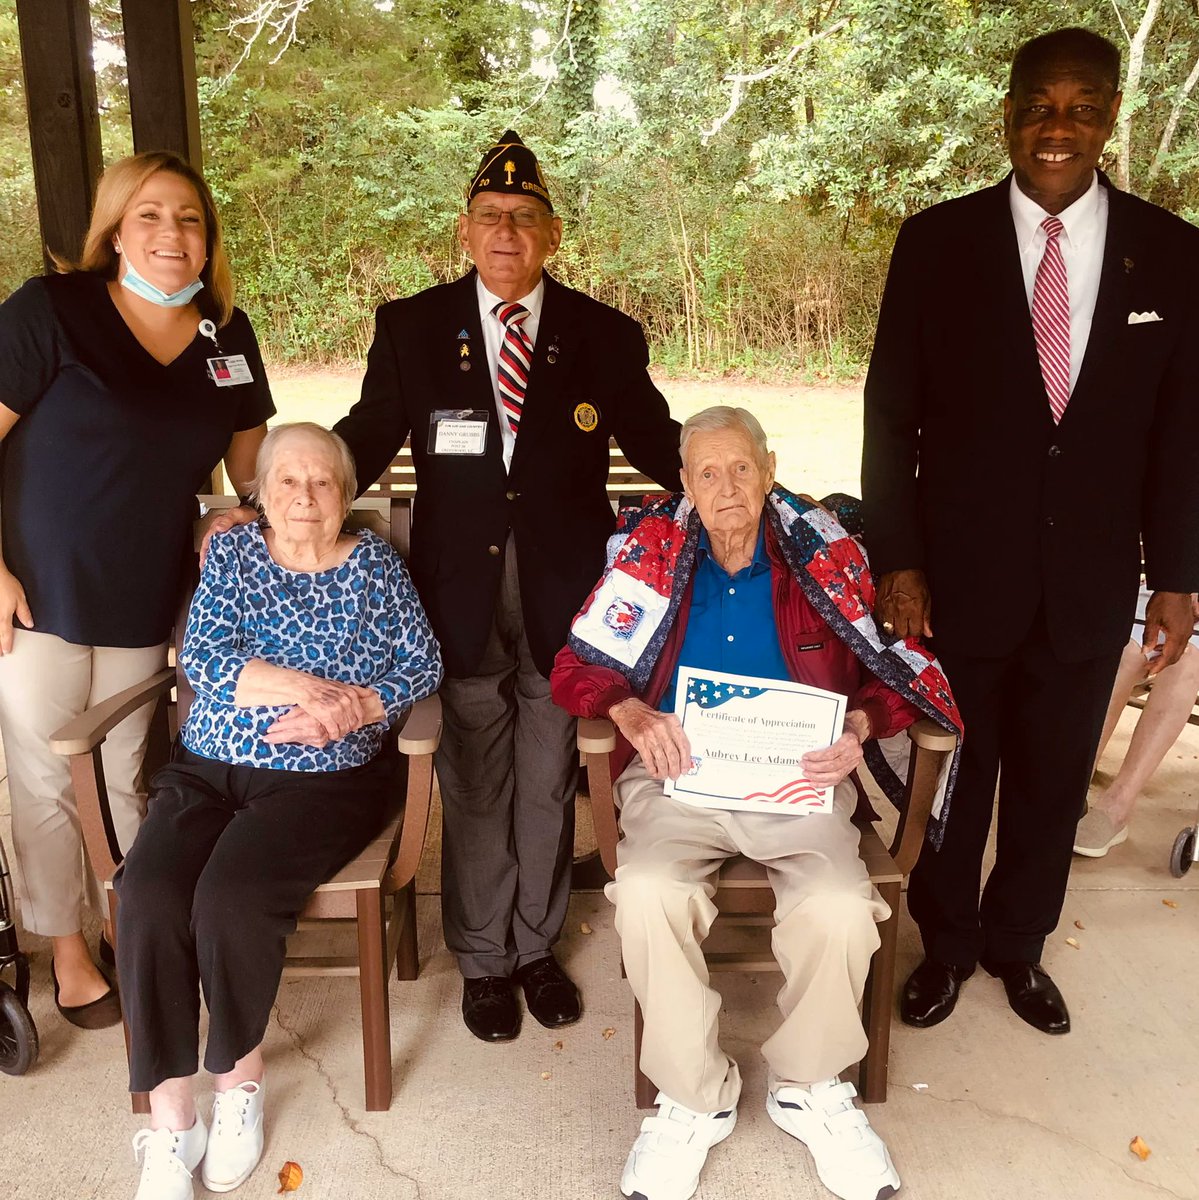 Aubrey and Madge have been married an amazing 74 years. Aubrey is an Army WWII veteran who is now on his Last Patrol with @HospiceofthePiedmont

He was born in Carnsville, GA on April 13, 1926.  During the war, he served in Europe and was stationed in Italy when the war ended.